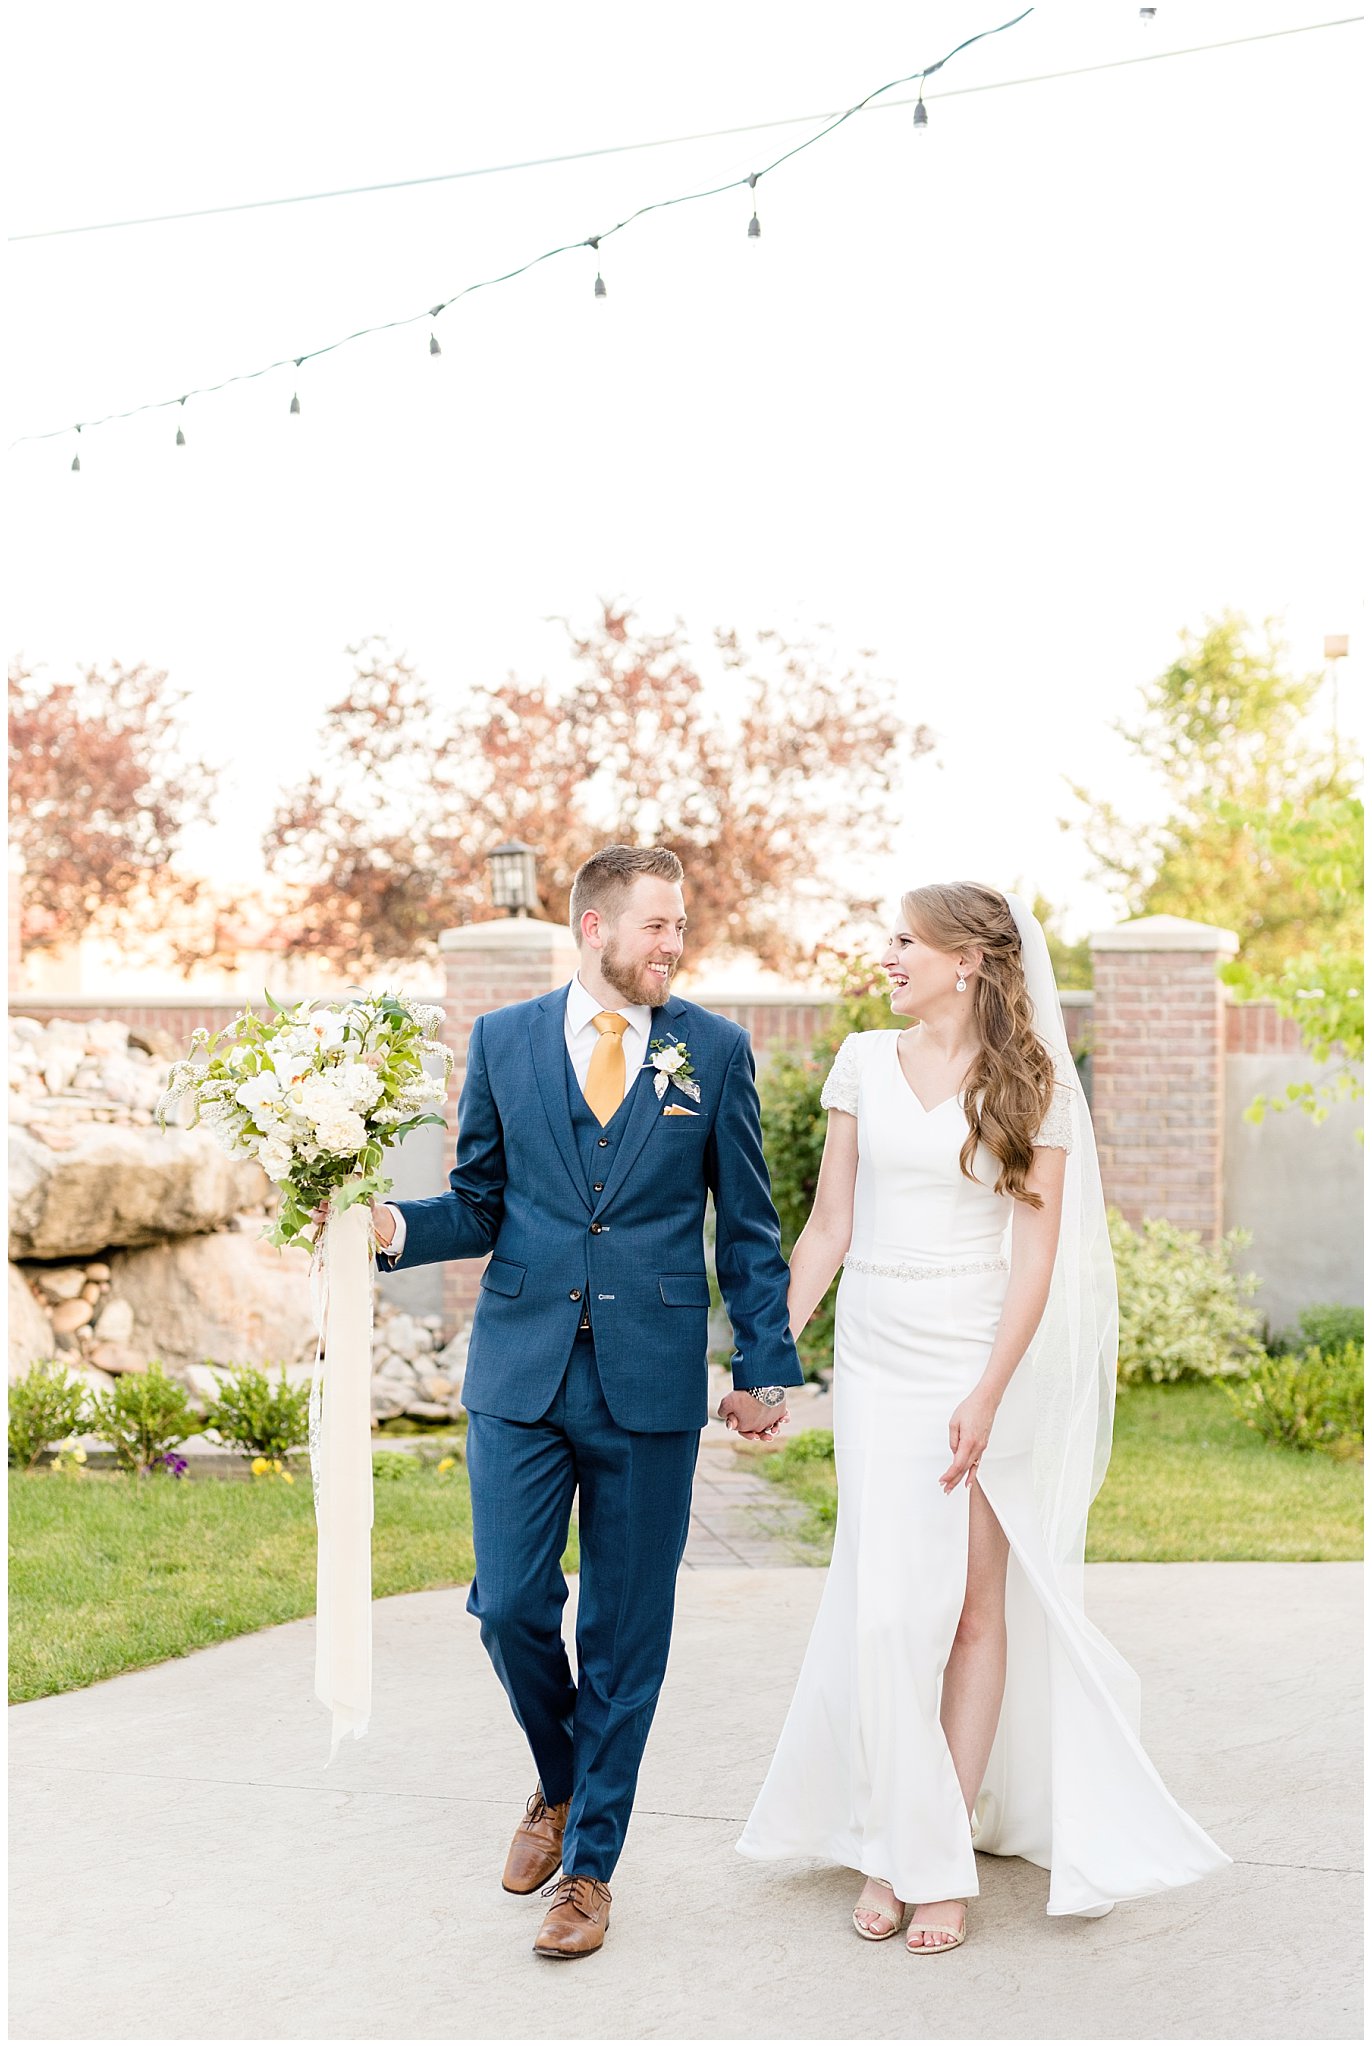 Bride and groom walking and laughing | gold, navy and white wedding | Talia Event Center | Utah Wedding Photography | Jessie and Dallin Photography